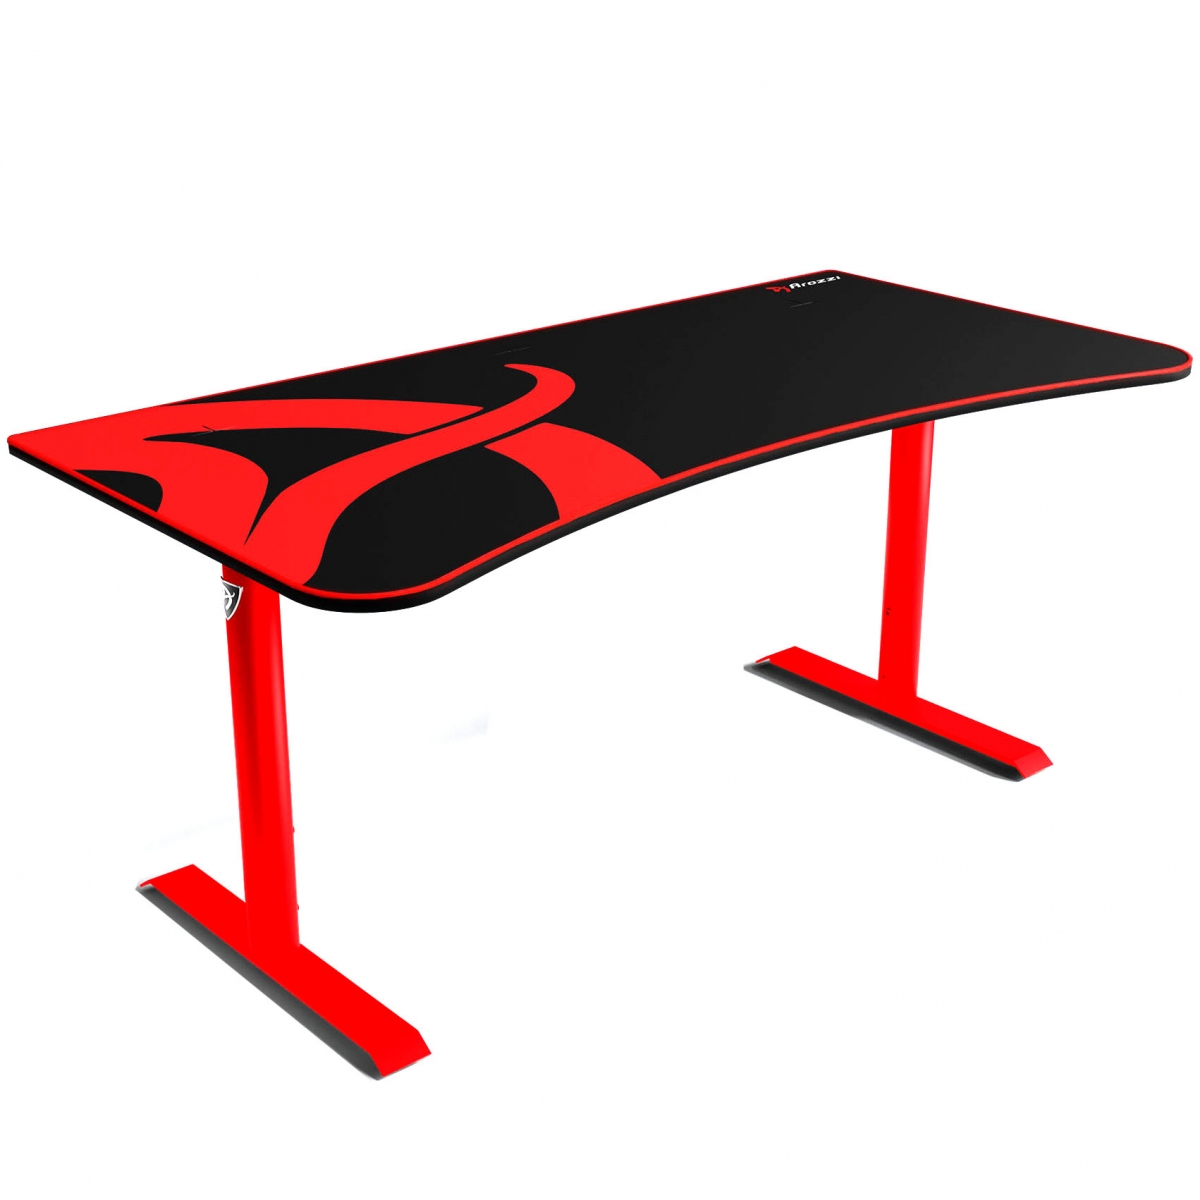    Arozzi Arena Gaming Desk Red - 